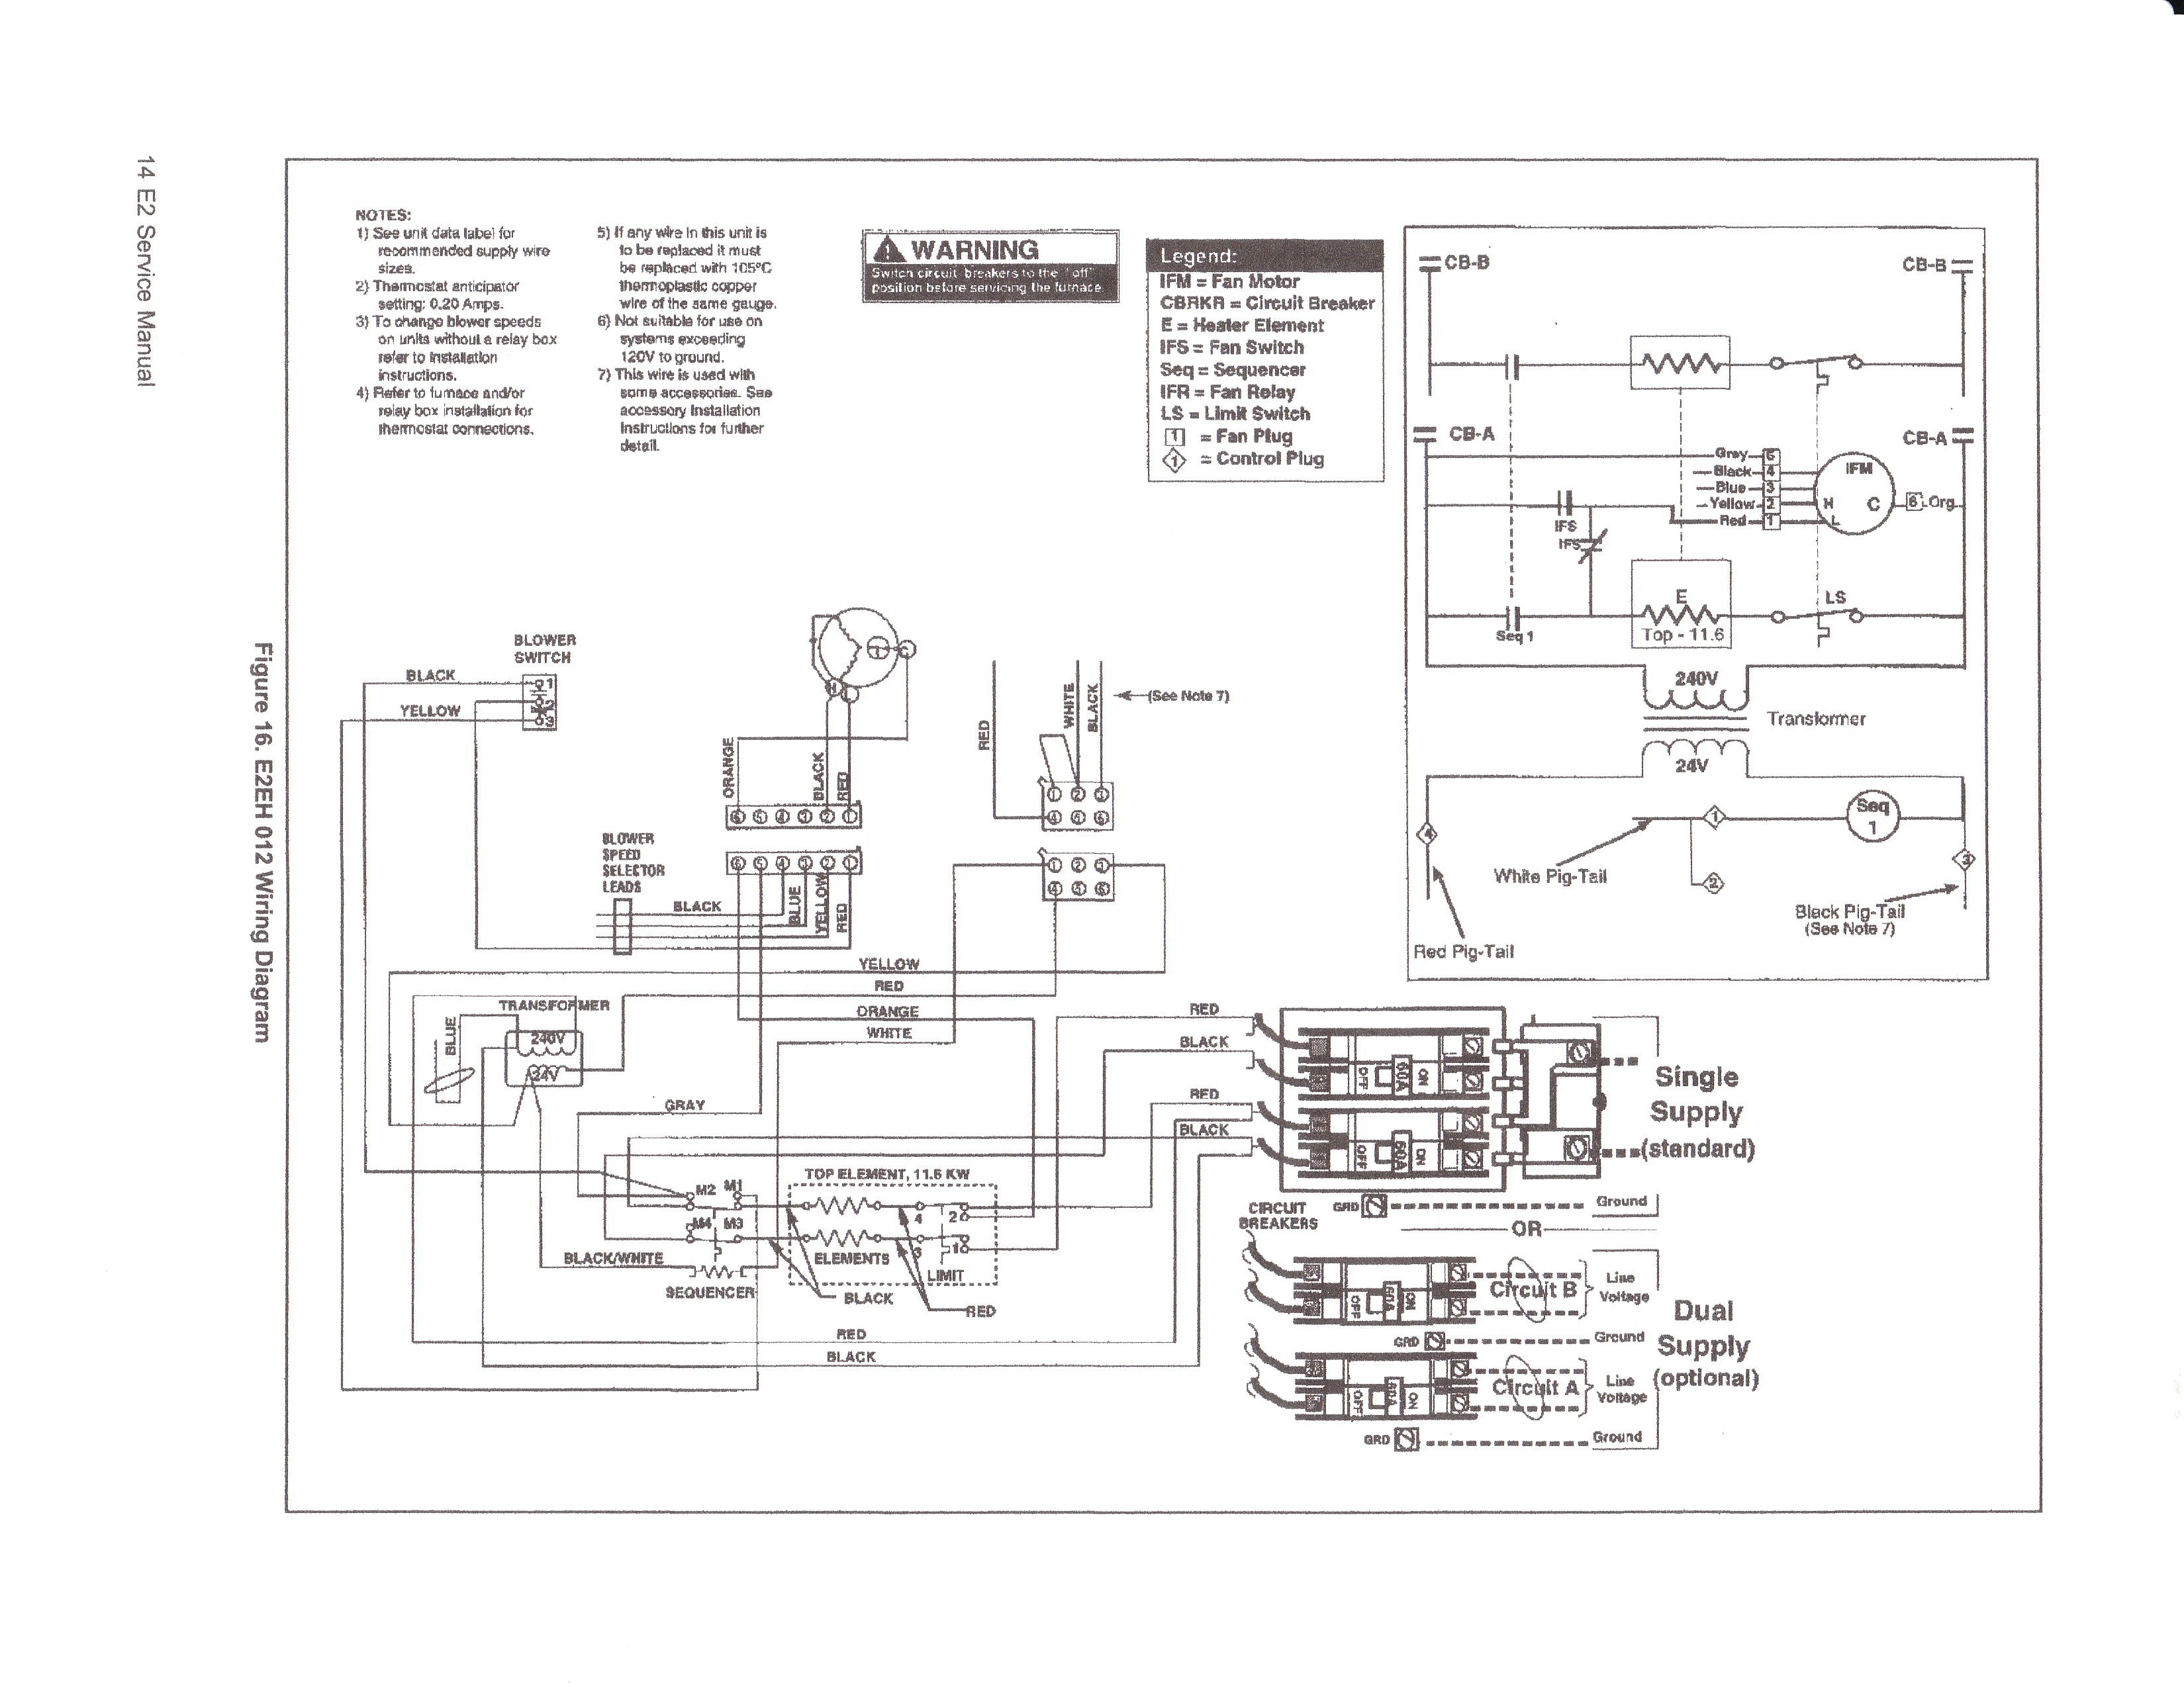 Wiring Diagram for Ac Unit thermostat Best Wiring A Ac thermostat Diagram Valid Dometic thermostat Wiring